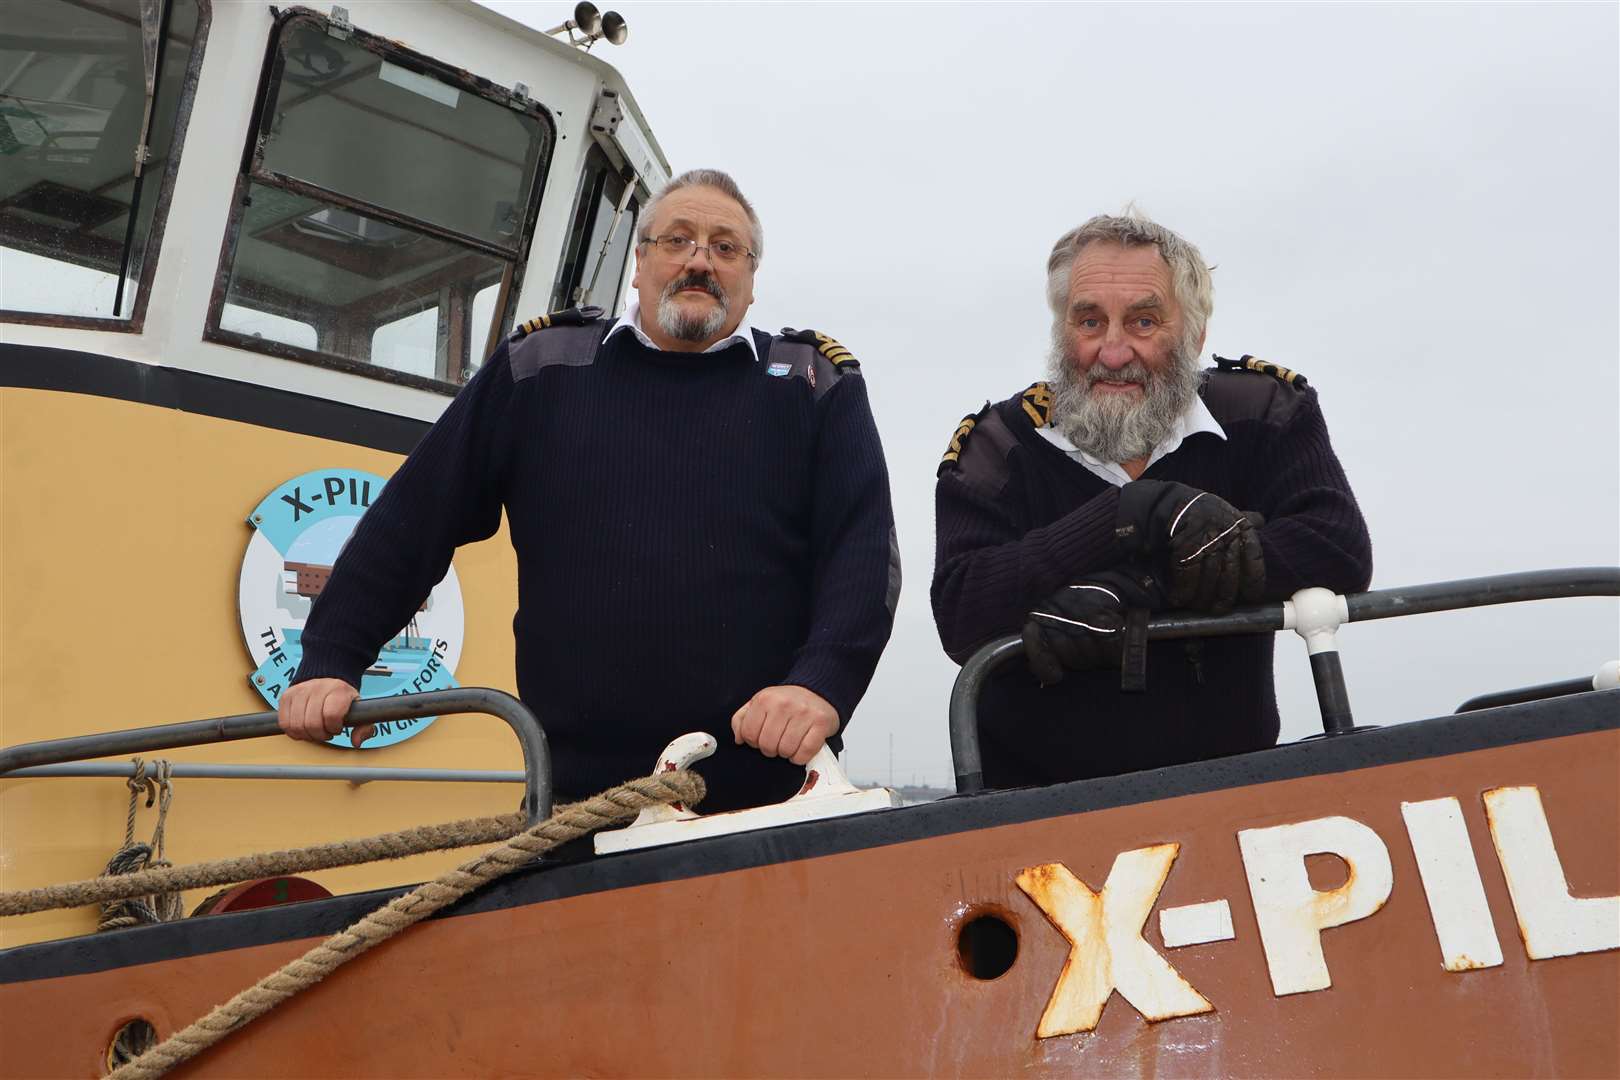 First Mate Mark Thorne, left, and skipper Capt Alan Harmer aboard the X-Pilot at Queenborough